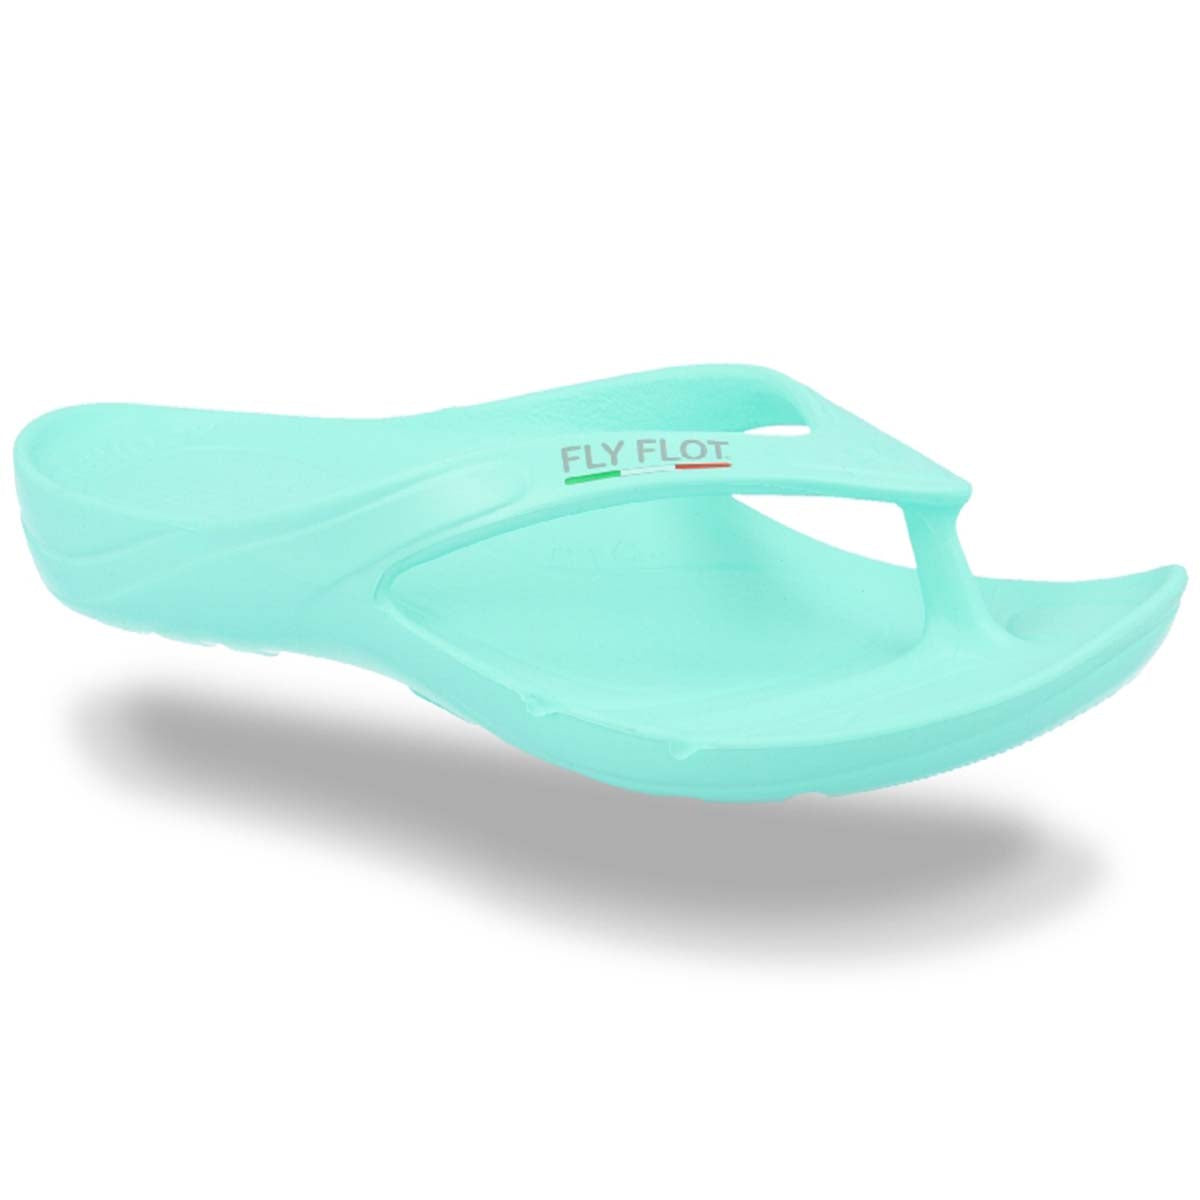 See the Ergotec Waterproof Flip Flops Narrow Width in the colour BLUE, available in various sizes